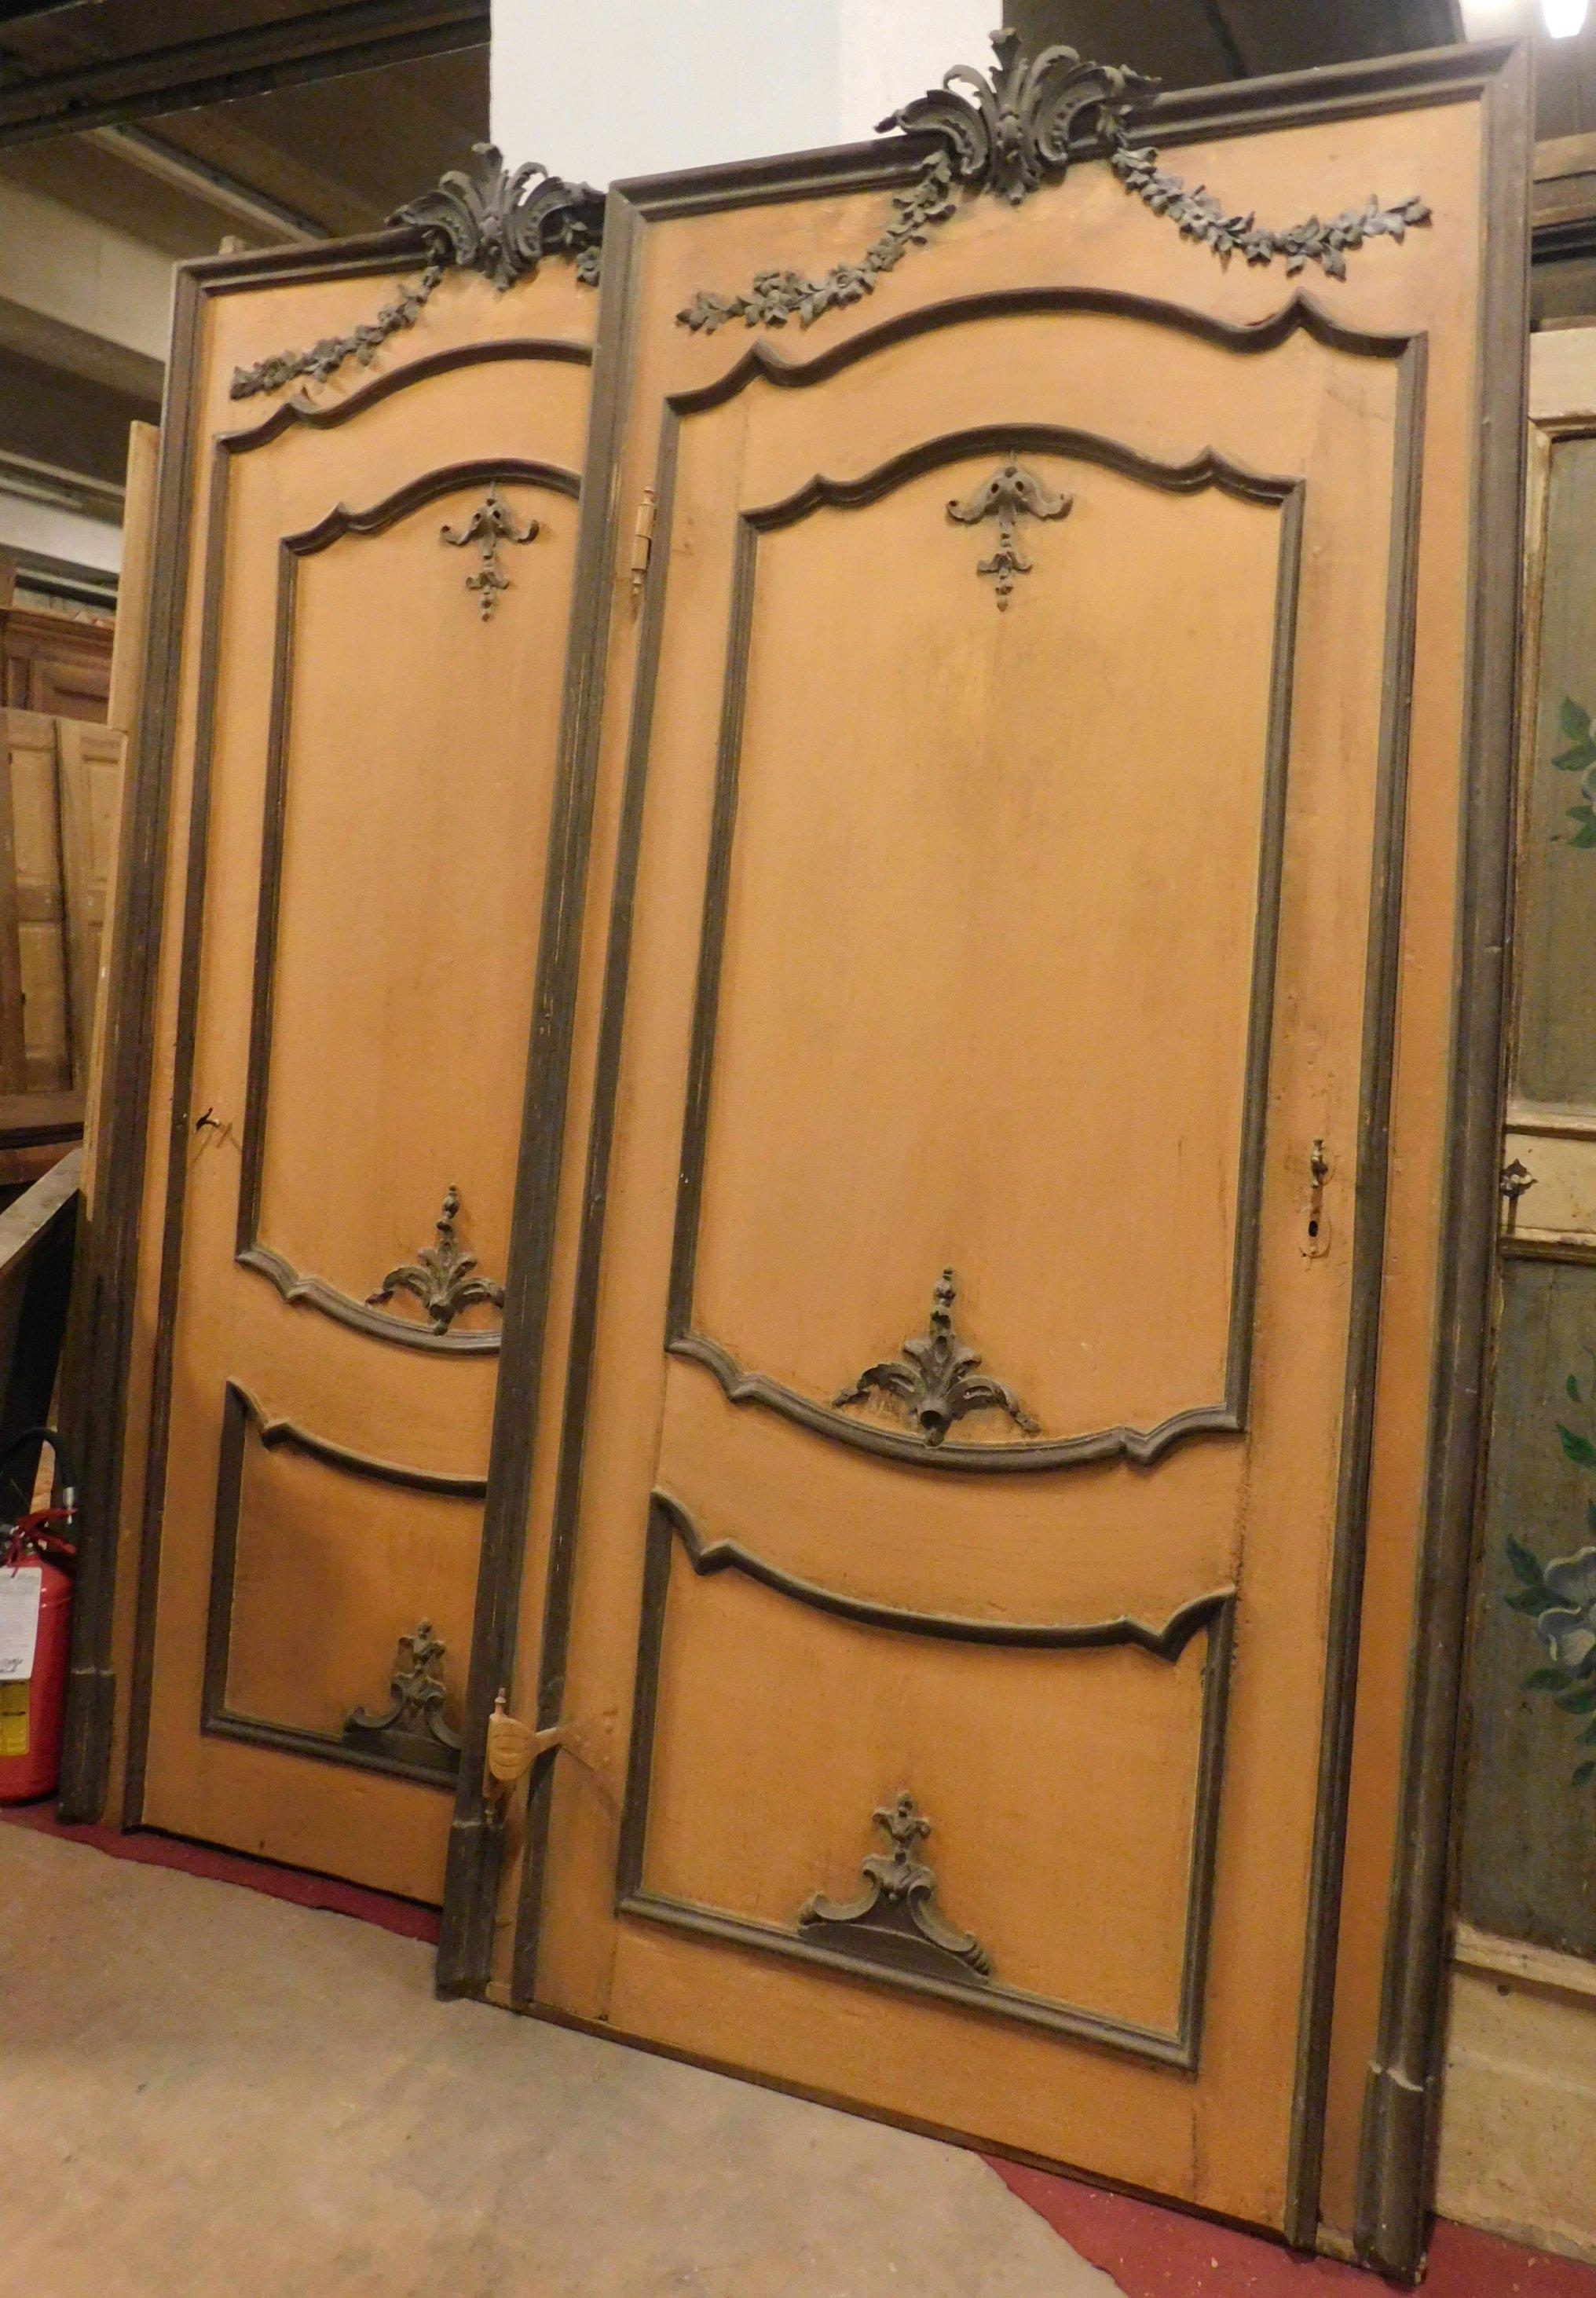 Set of two antique orange lacquered doors with brown wooden concihlie, hand carved, real and very beautiful wood with patina, built in Italy in the late 1700s.
Beautiful in front and behind, impnent and beautiful if combined in an elegant and